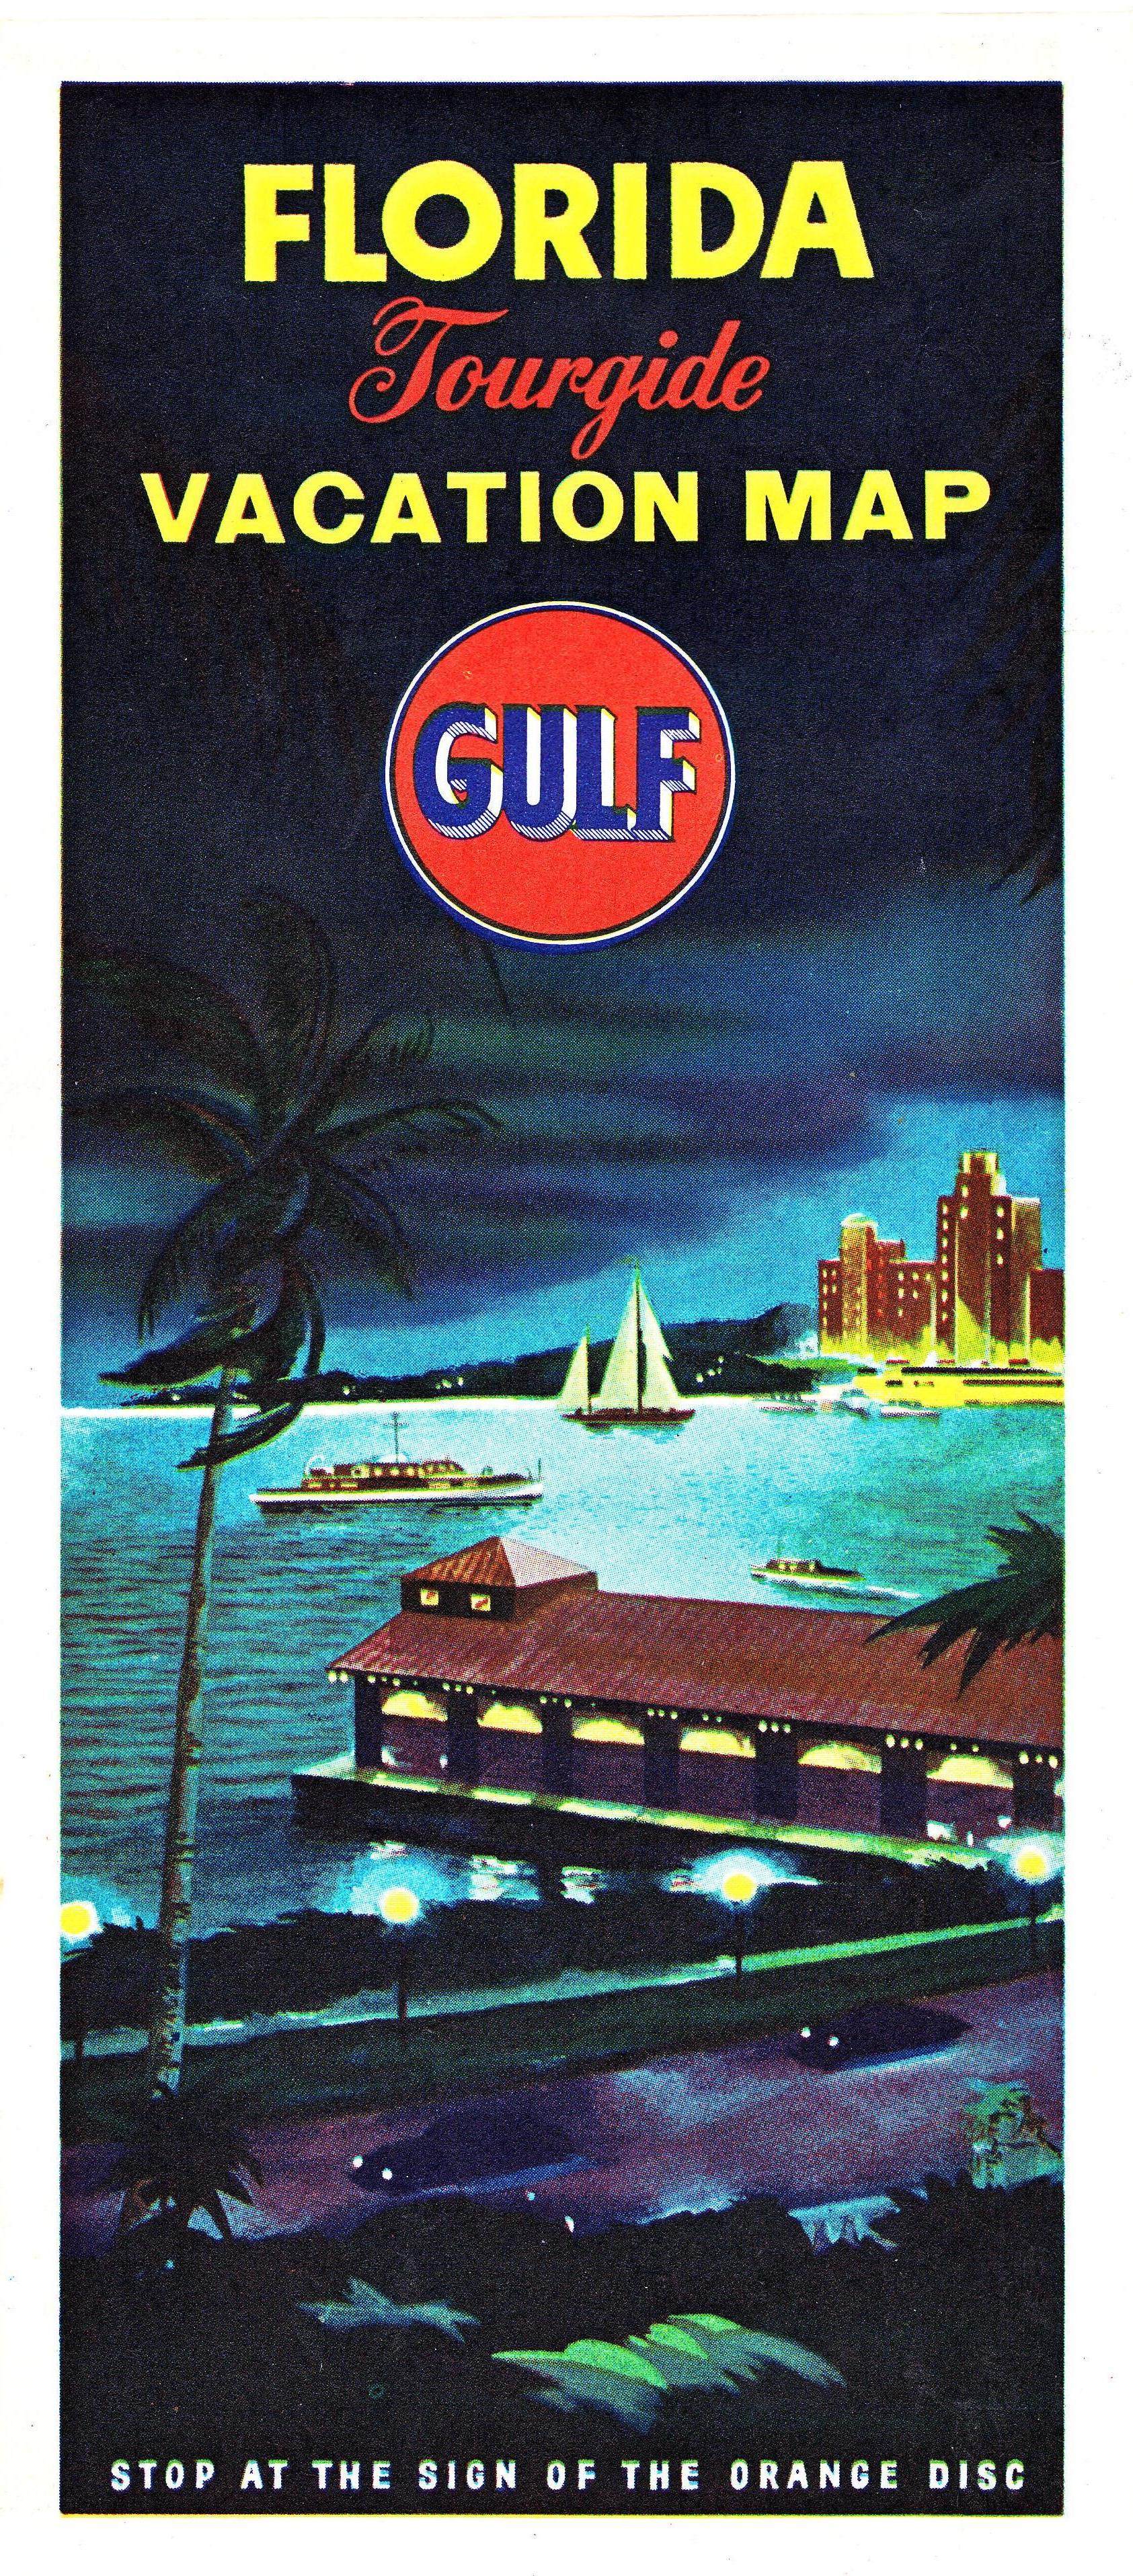 Gulf Oil Florida Tourguide Vacation Map cover - 1955